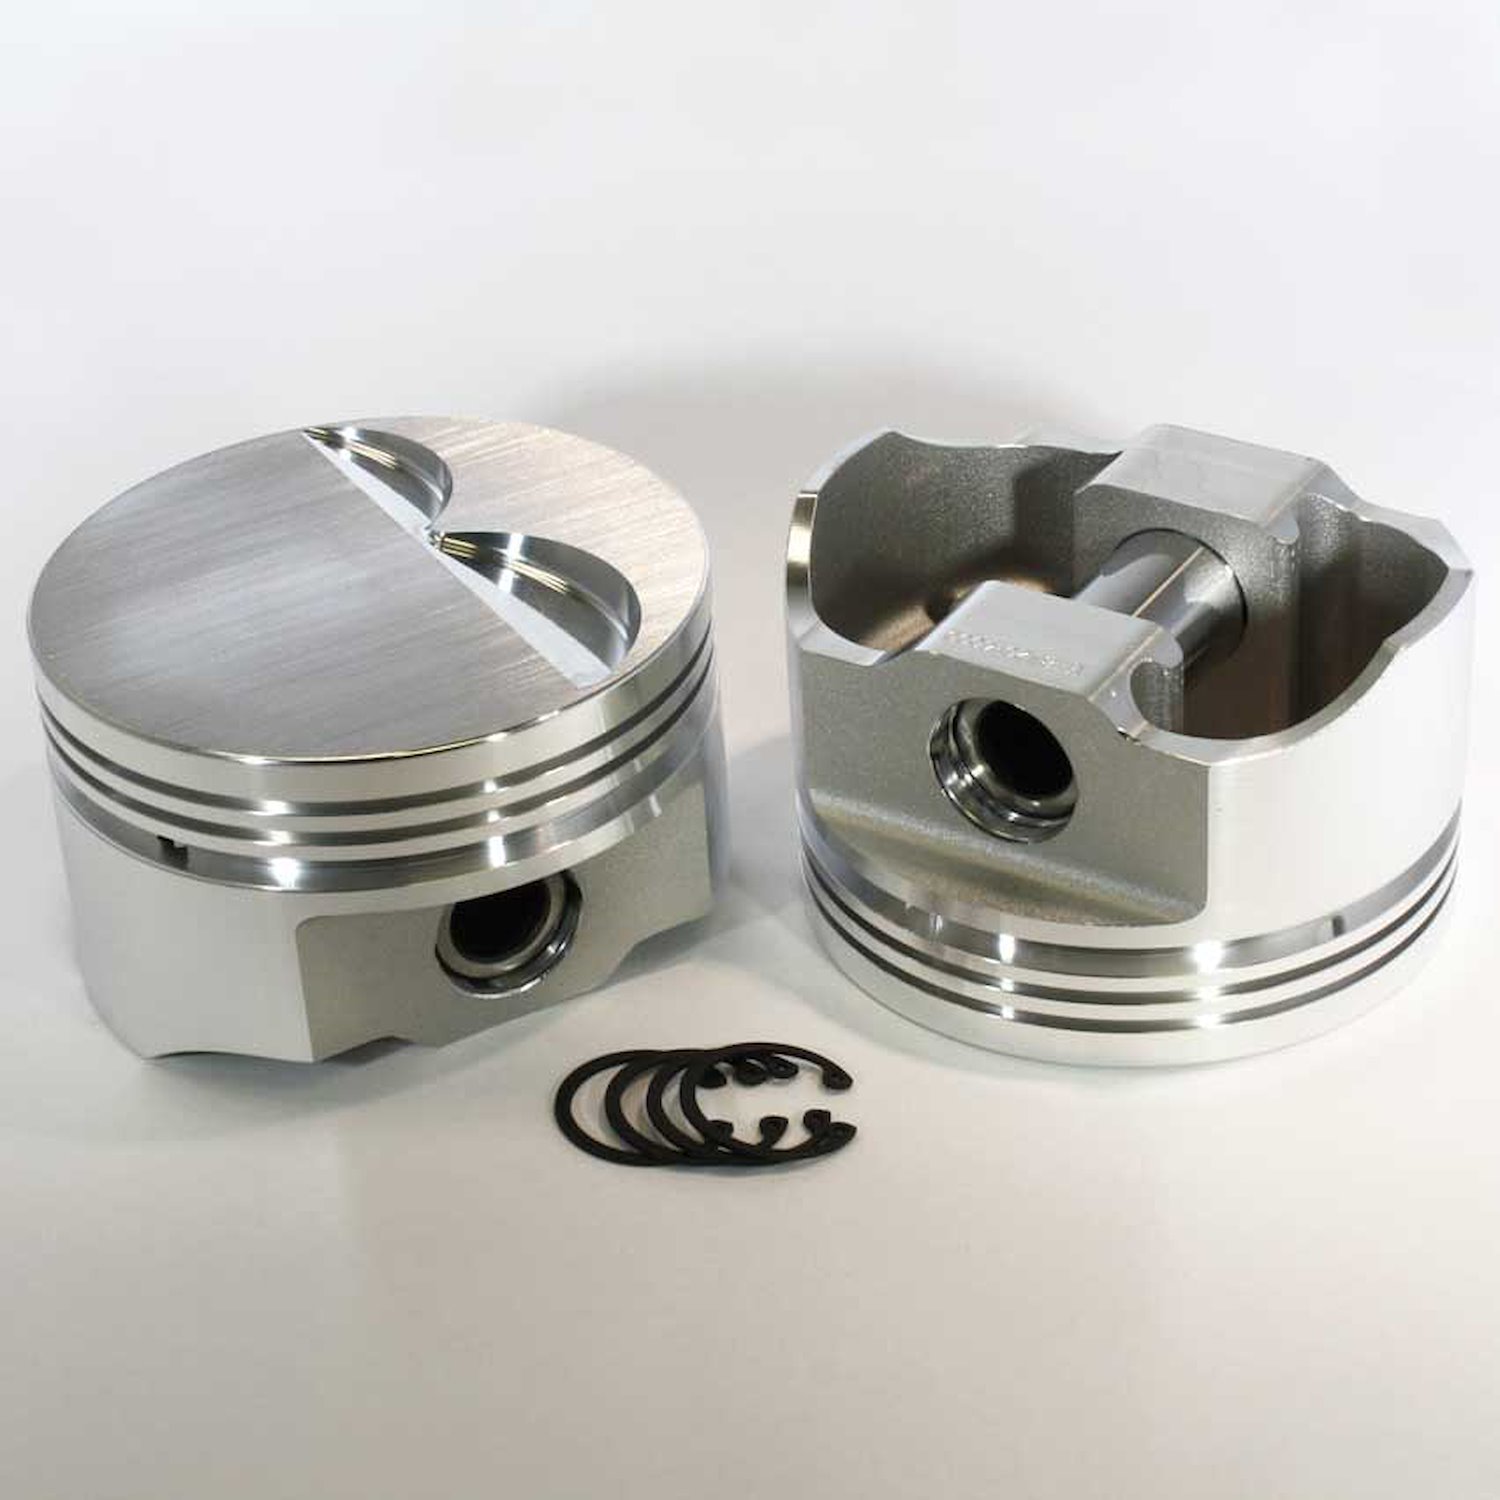 8775-4070 E-Series Flat Top Piston Set for 1999-2019 Chevy LS, 4.070 in. Bore, -3cc Volume [OEM Stroke]